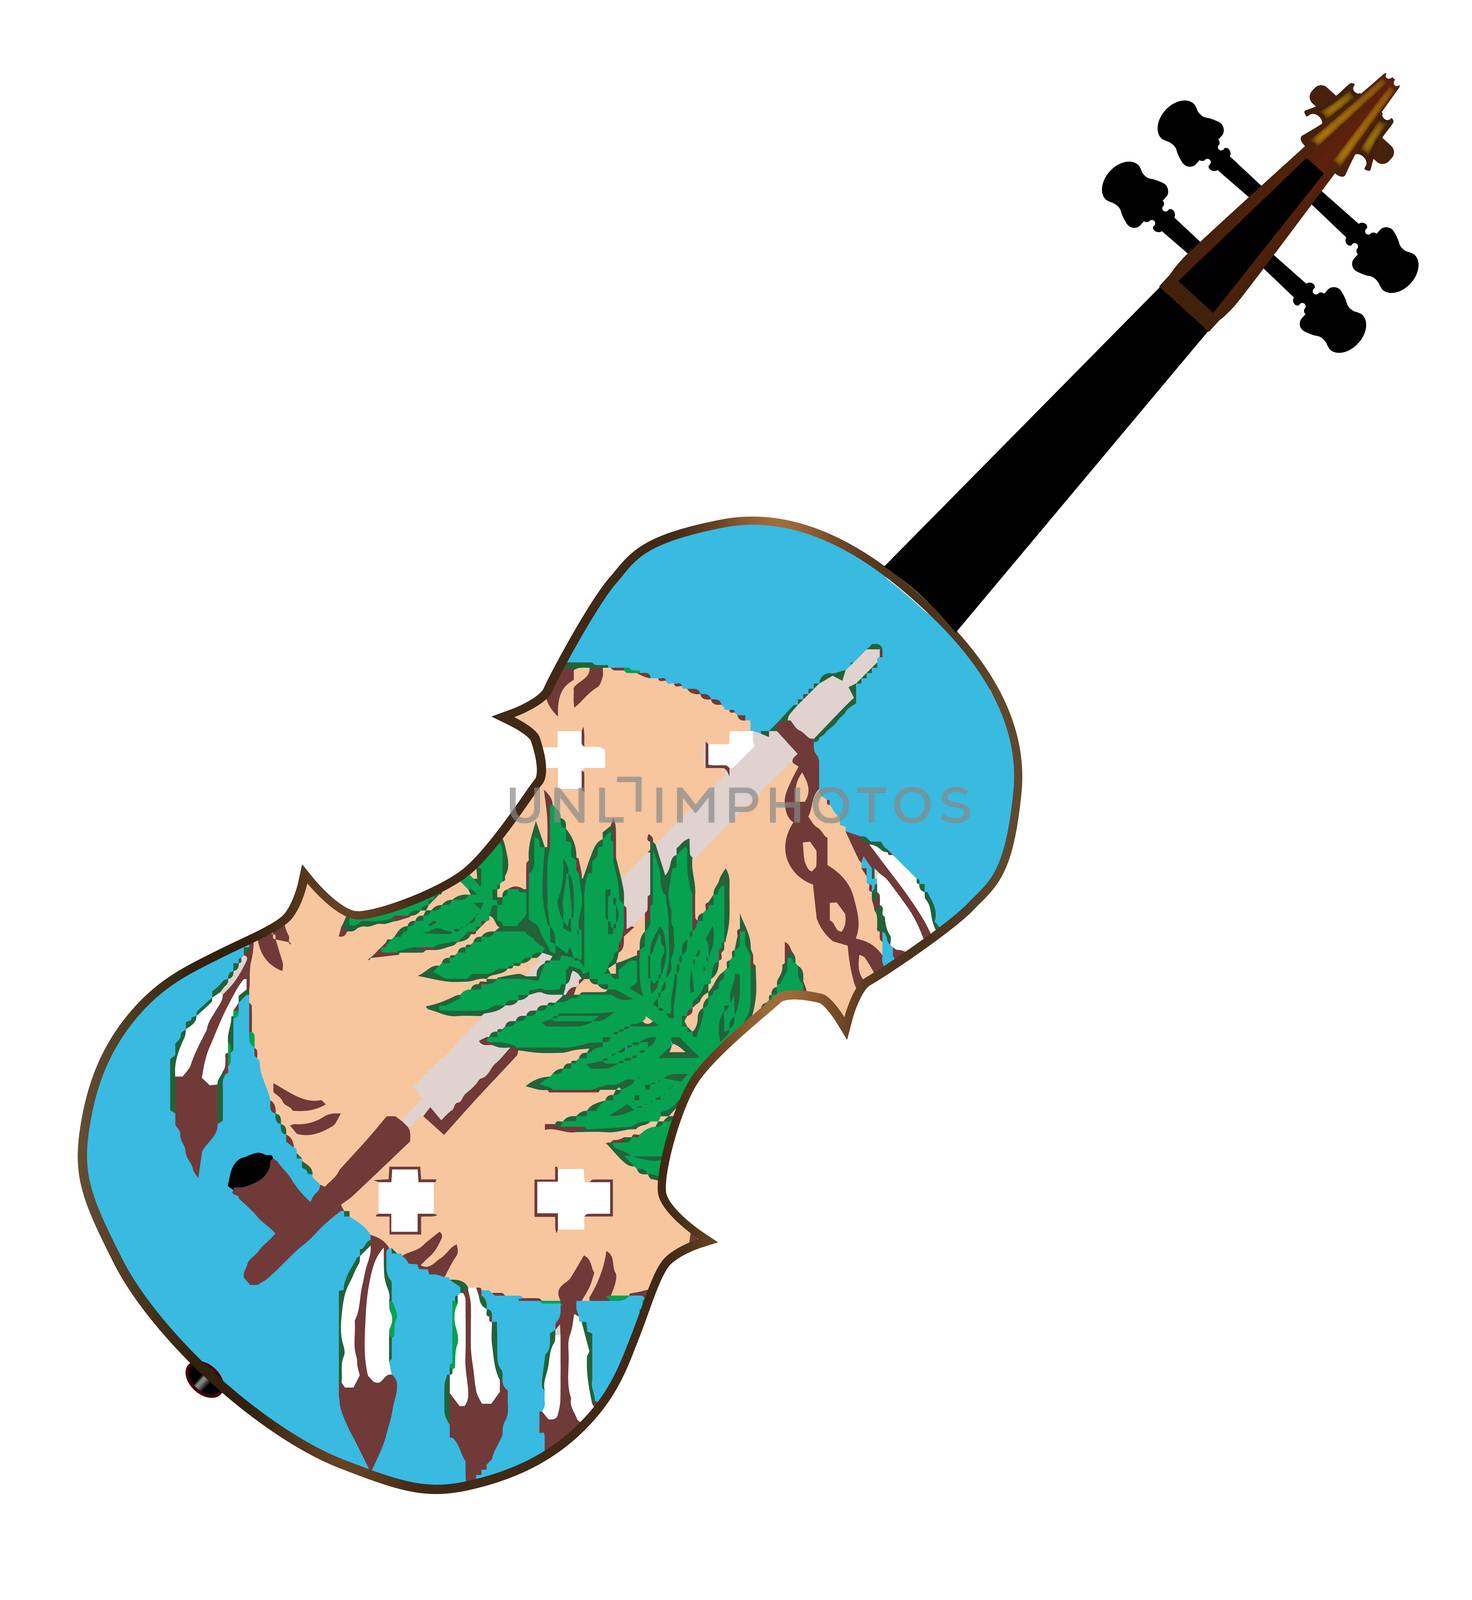 A typical violin with Oklahoma state flag isolated over a white background